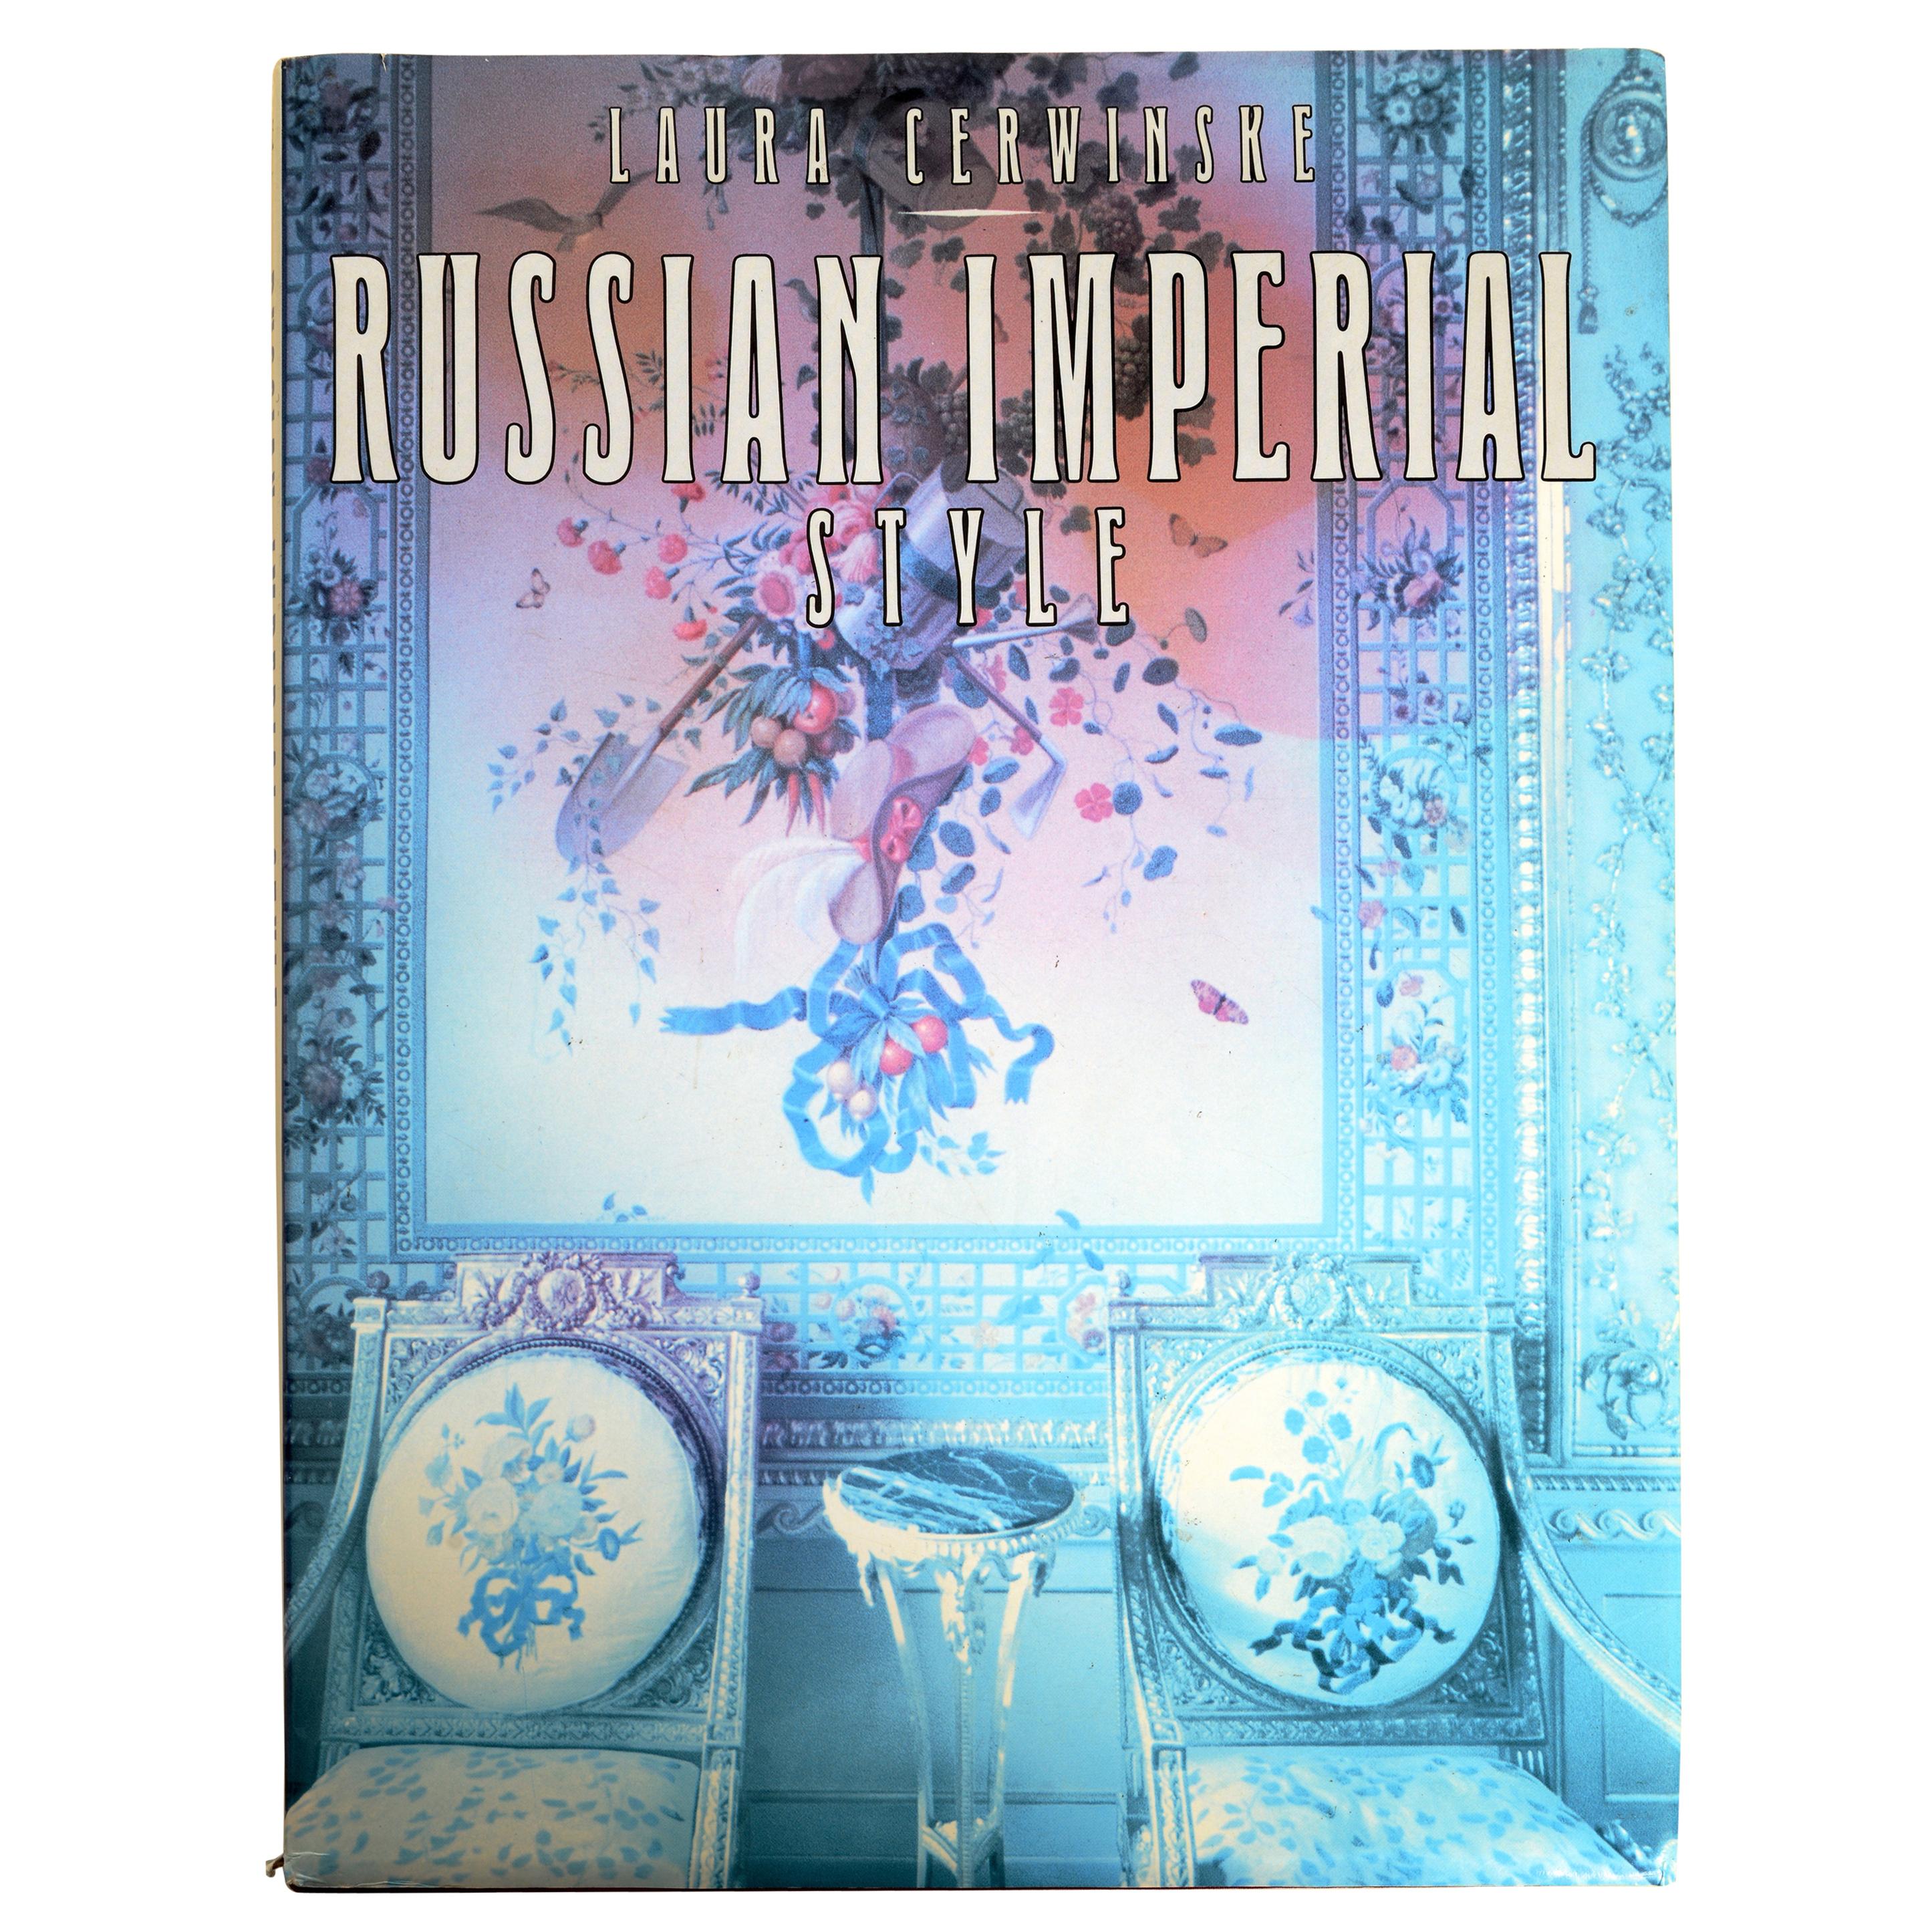 Russian Imperial Style by Laura Cerwinske, Stated 1st Ed